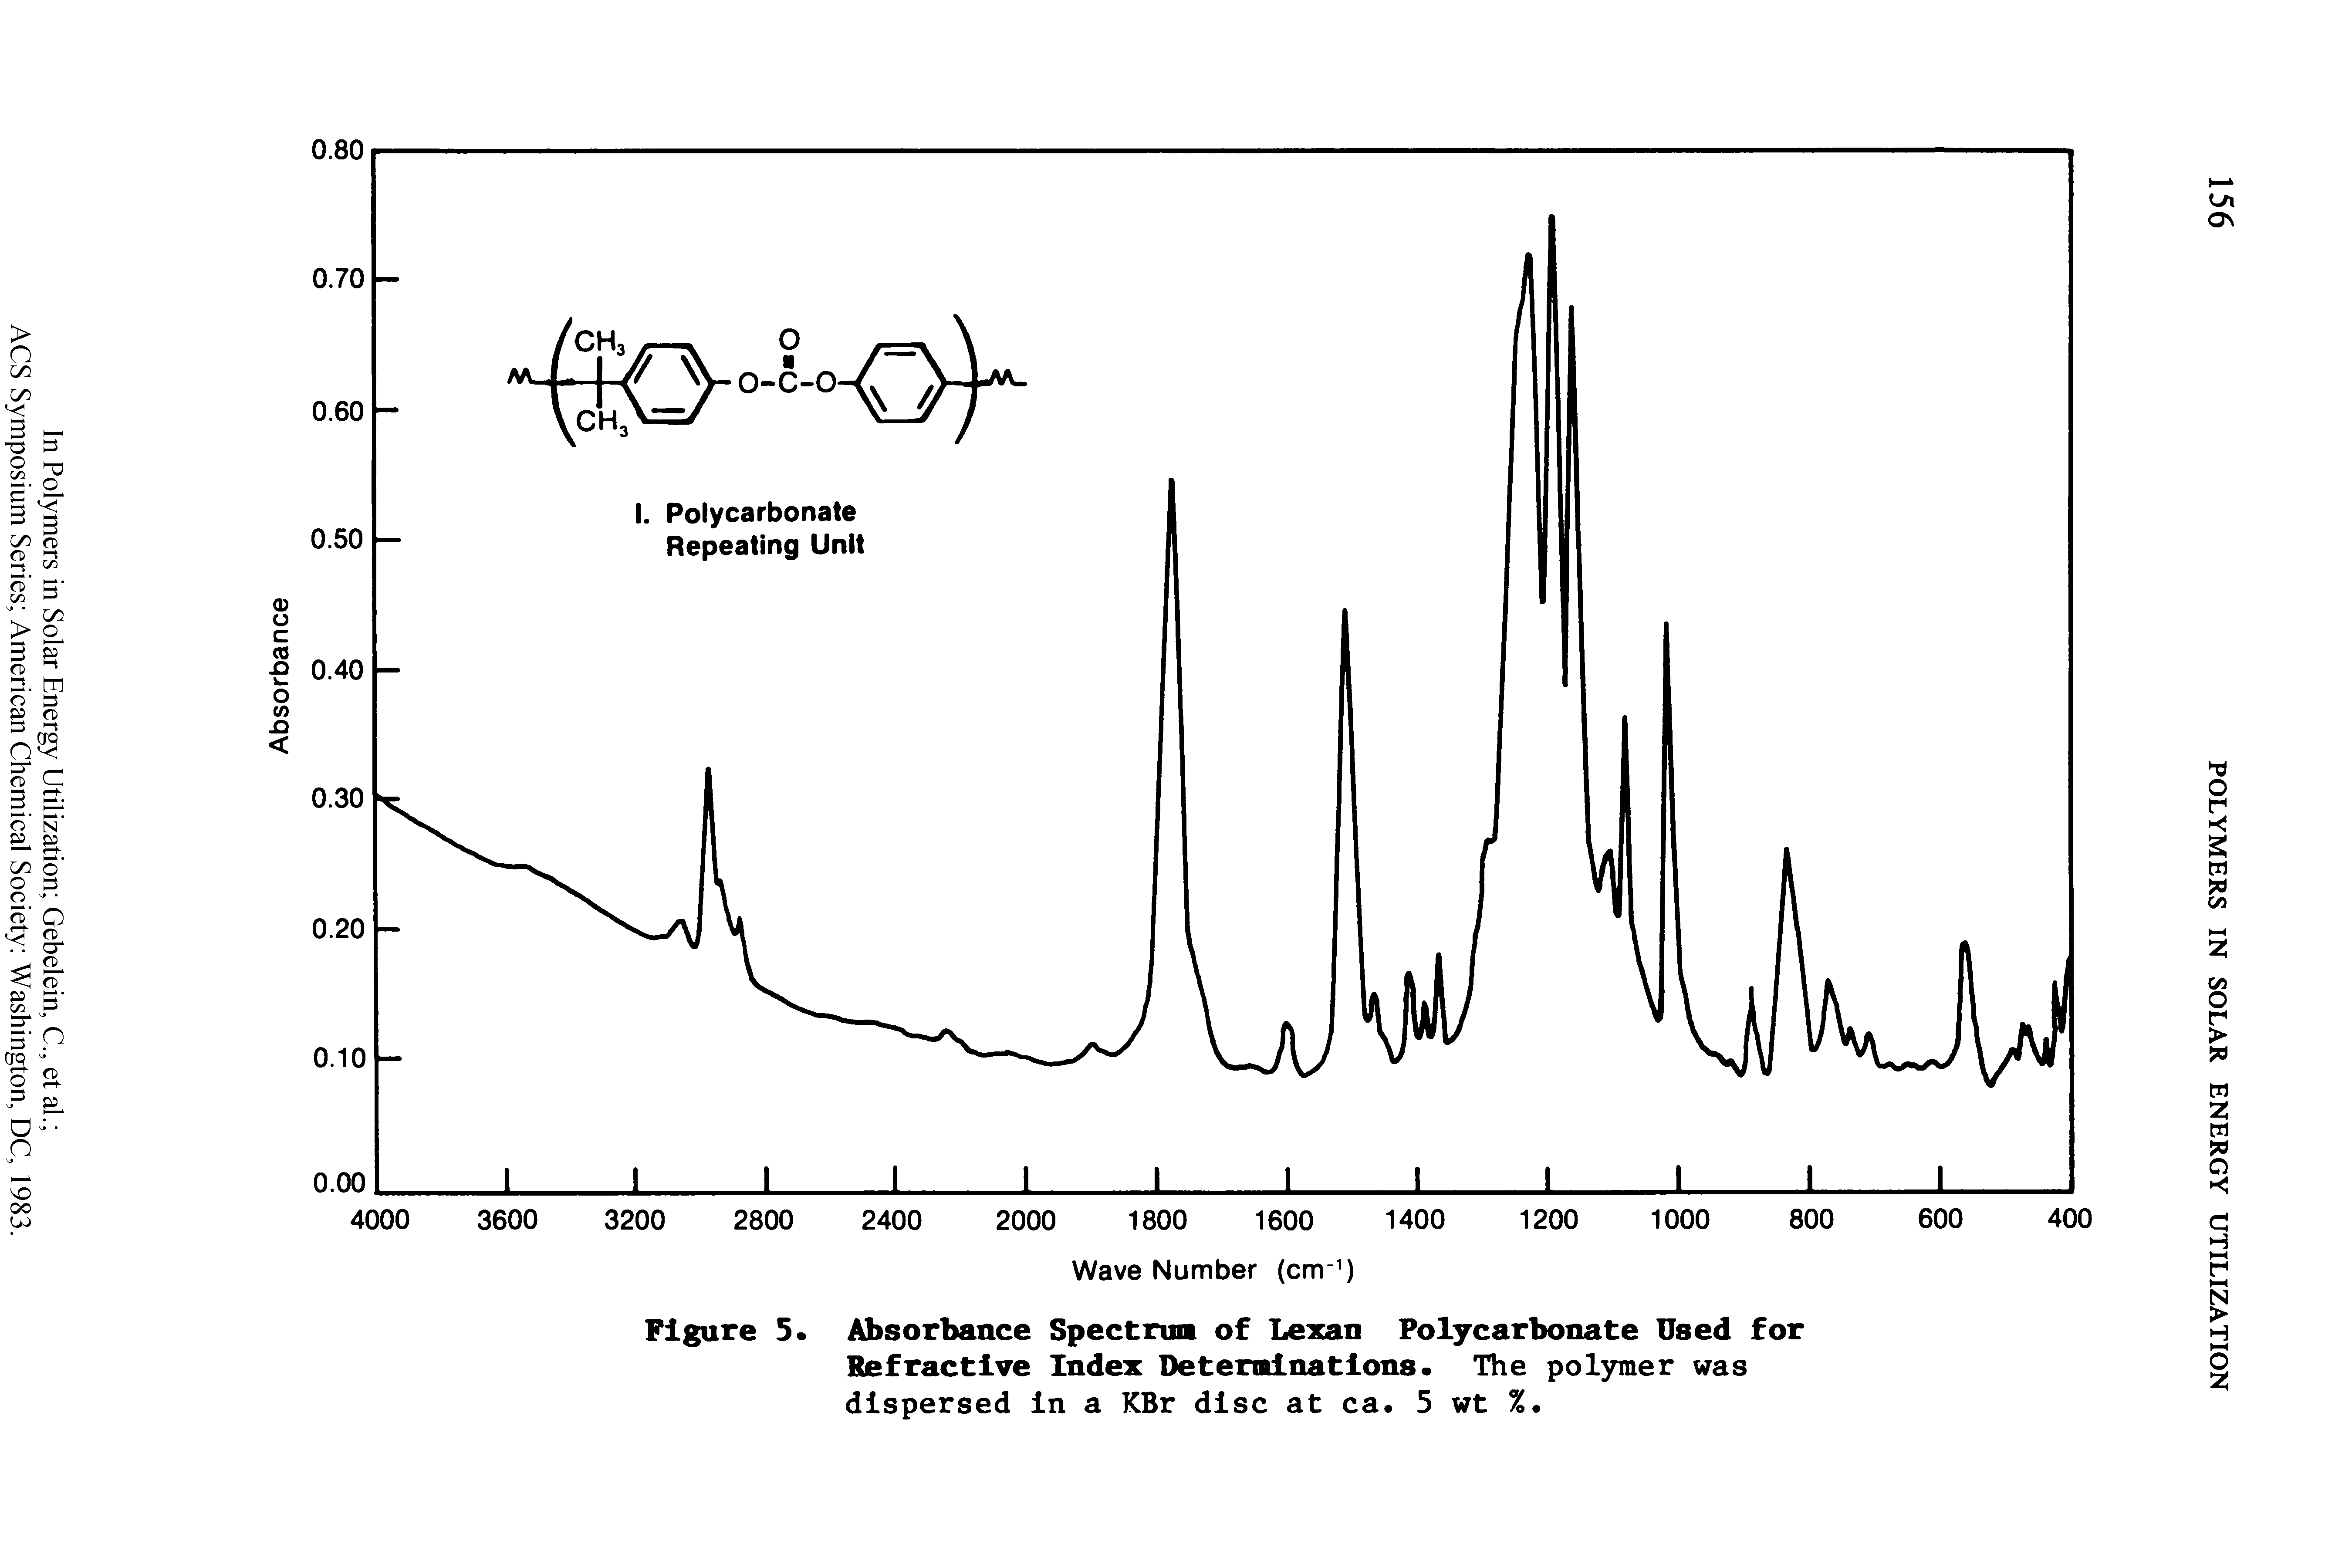 Figure 5. Absorbance Spectrum of Lexan Polycarbonate Used for Refractive Index Determinations. The polymer was dispersed in a KBr disc at ca 5 wt % ...